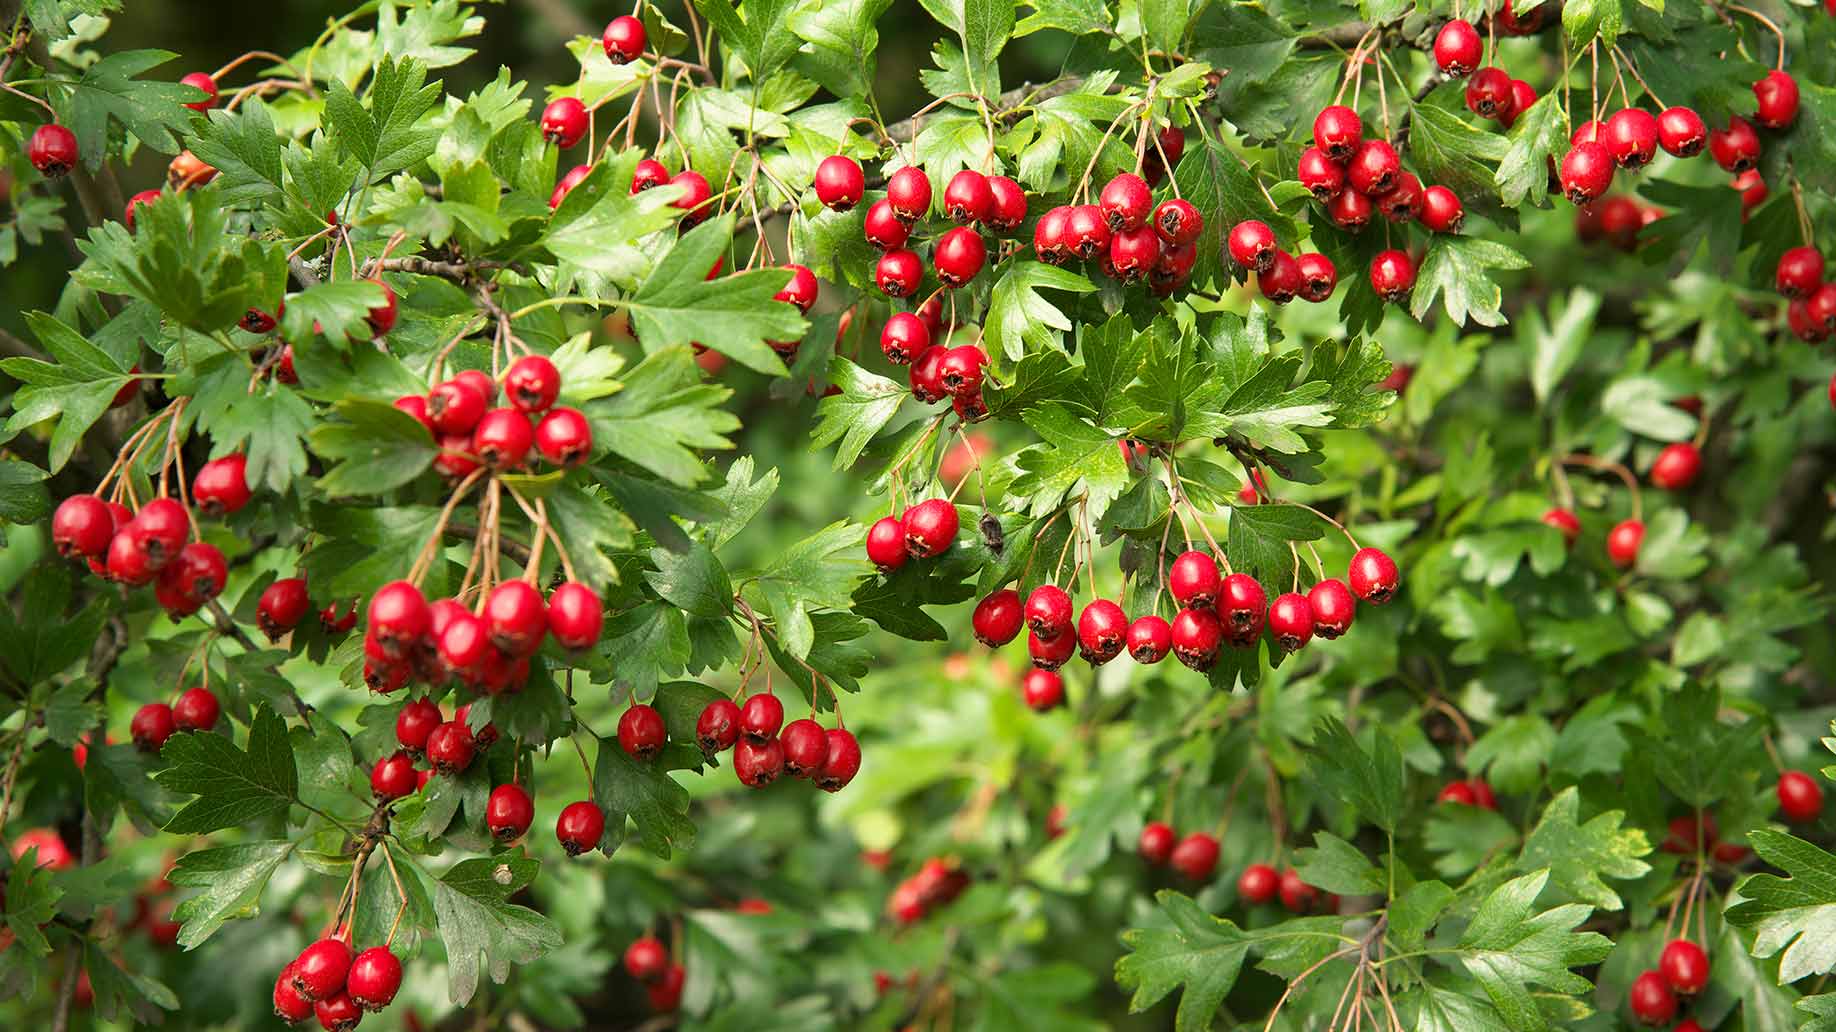 hawthorn red berries natural remedy lowers high blood pressure hypertension